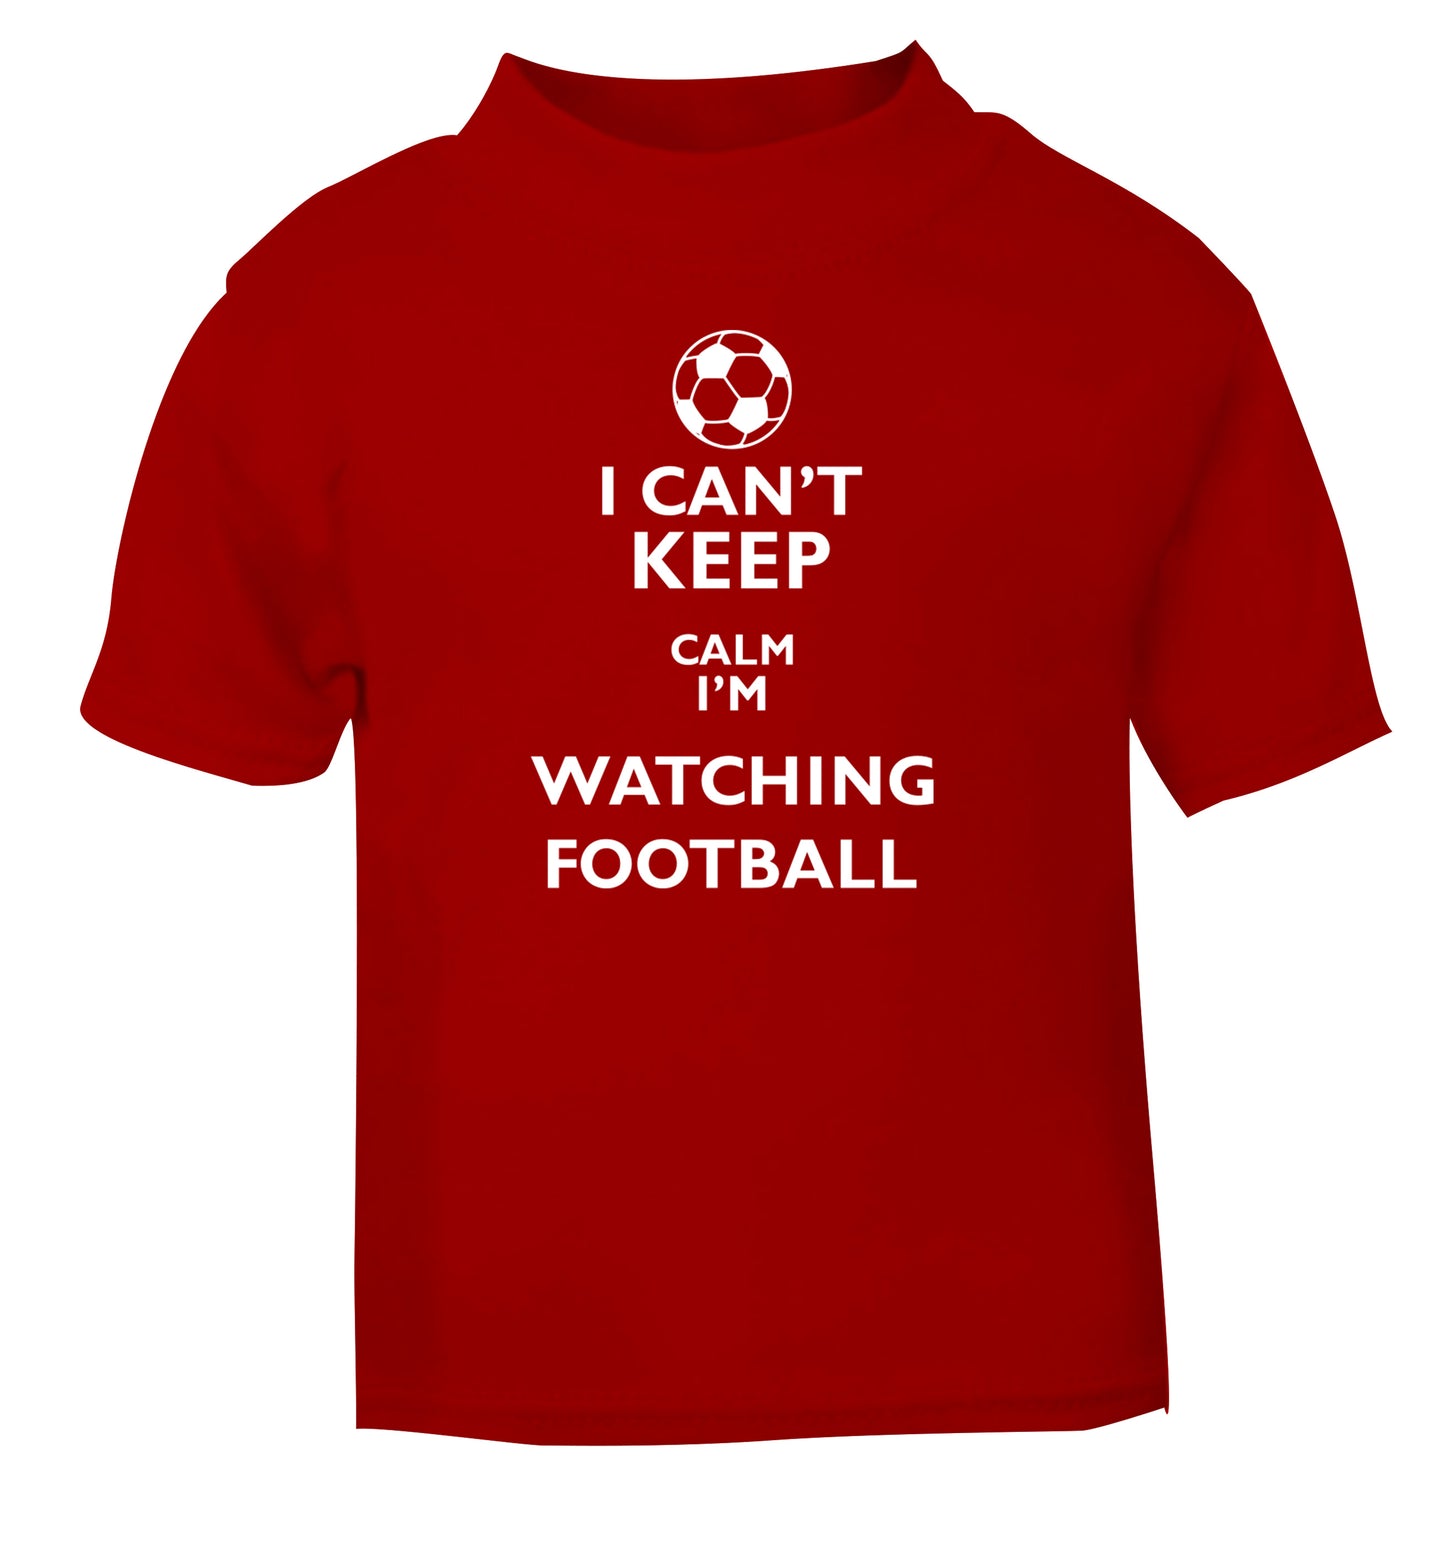 I can't keep calm I'm watching the football red Baby Toddler Tshirt 2 Years